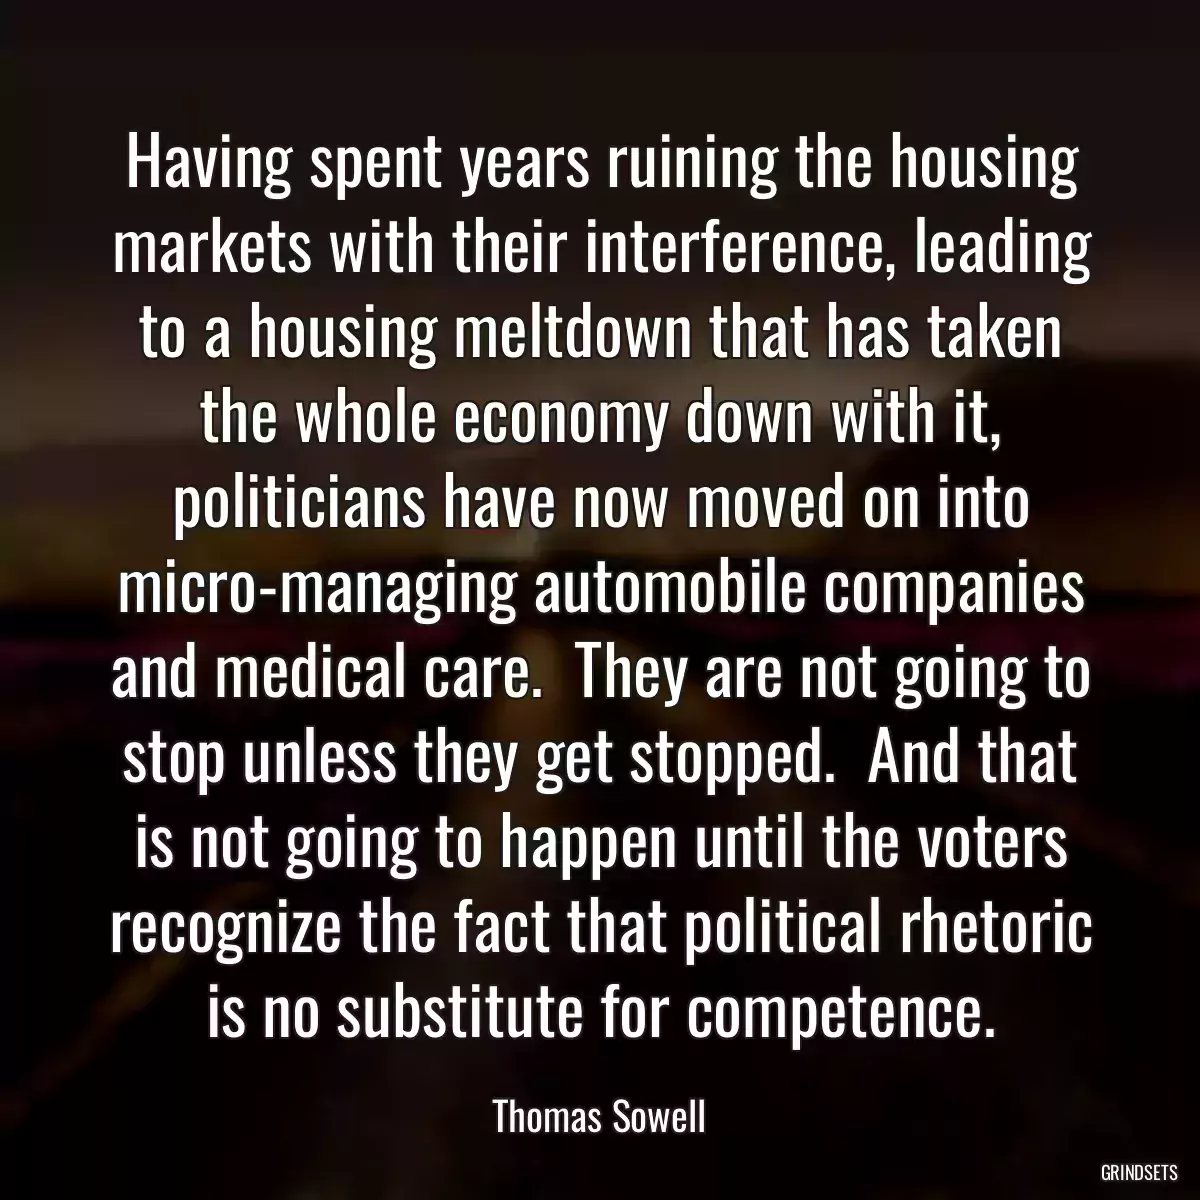 Having spent years ruining the housing markets with their interference, leading to a housing meltdown that has taken the whole economy down with it, politicians have now moved on into micro-managing automobile companies and medical care.  They are not going to stop unless they get stopped.  And that is not going to happen until the voters recognize the fact that political rhetoric is no substitute for competence.